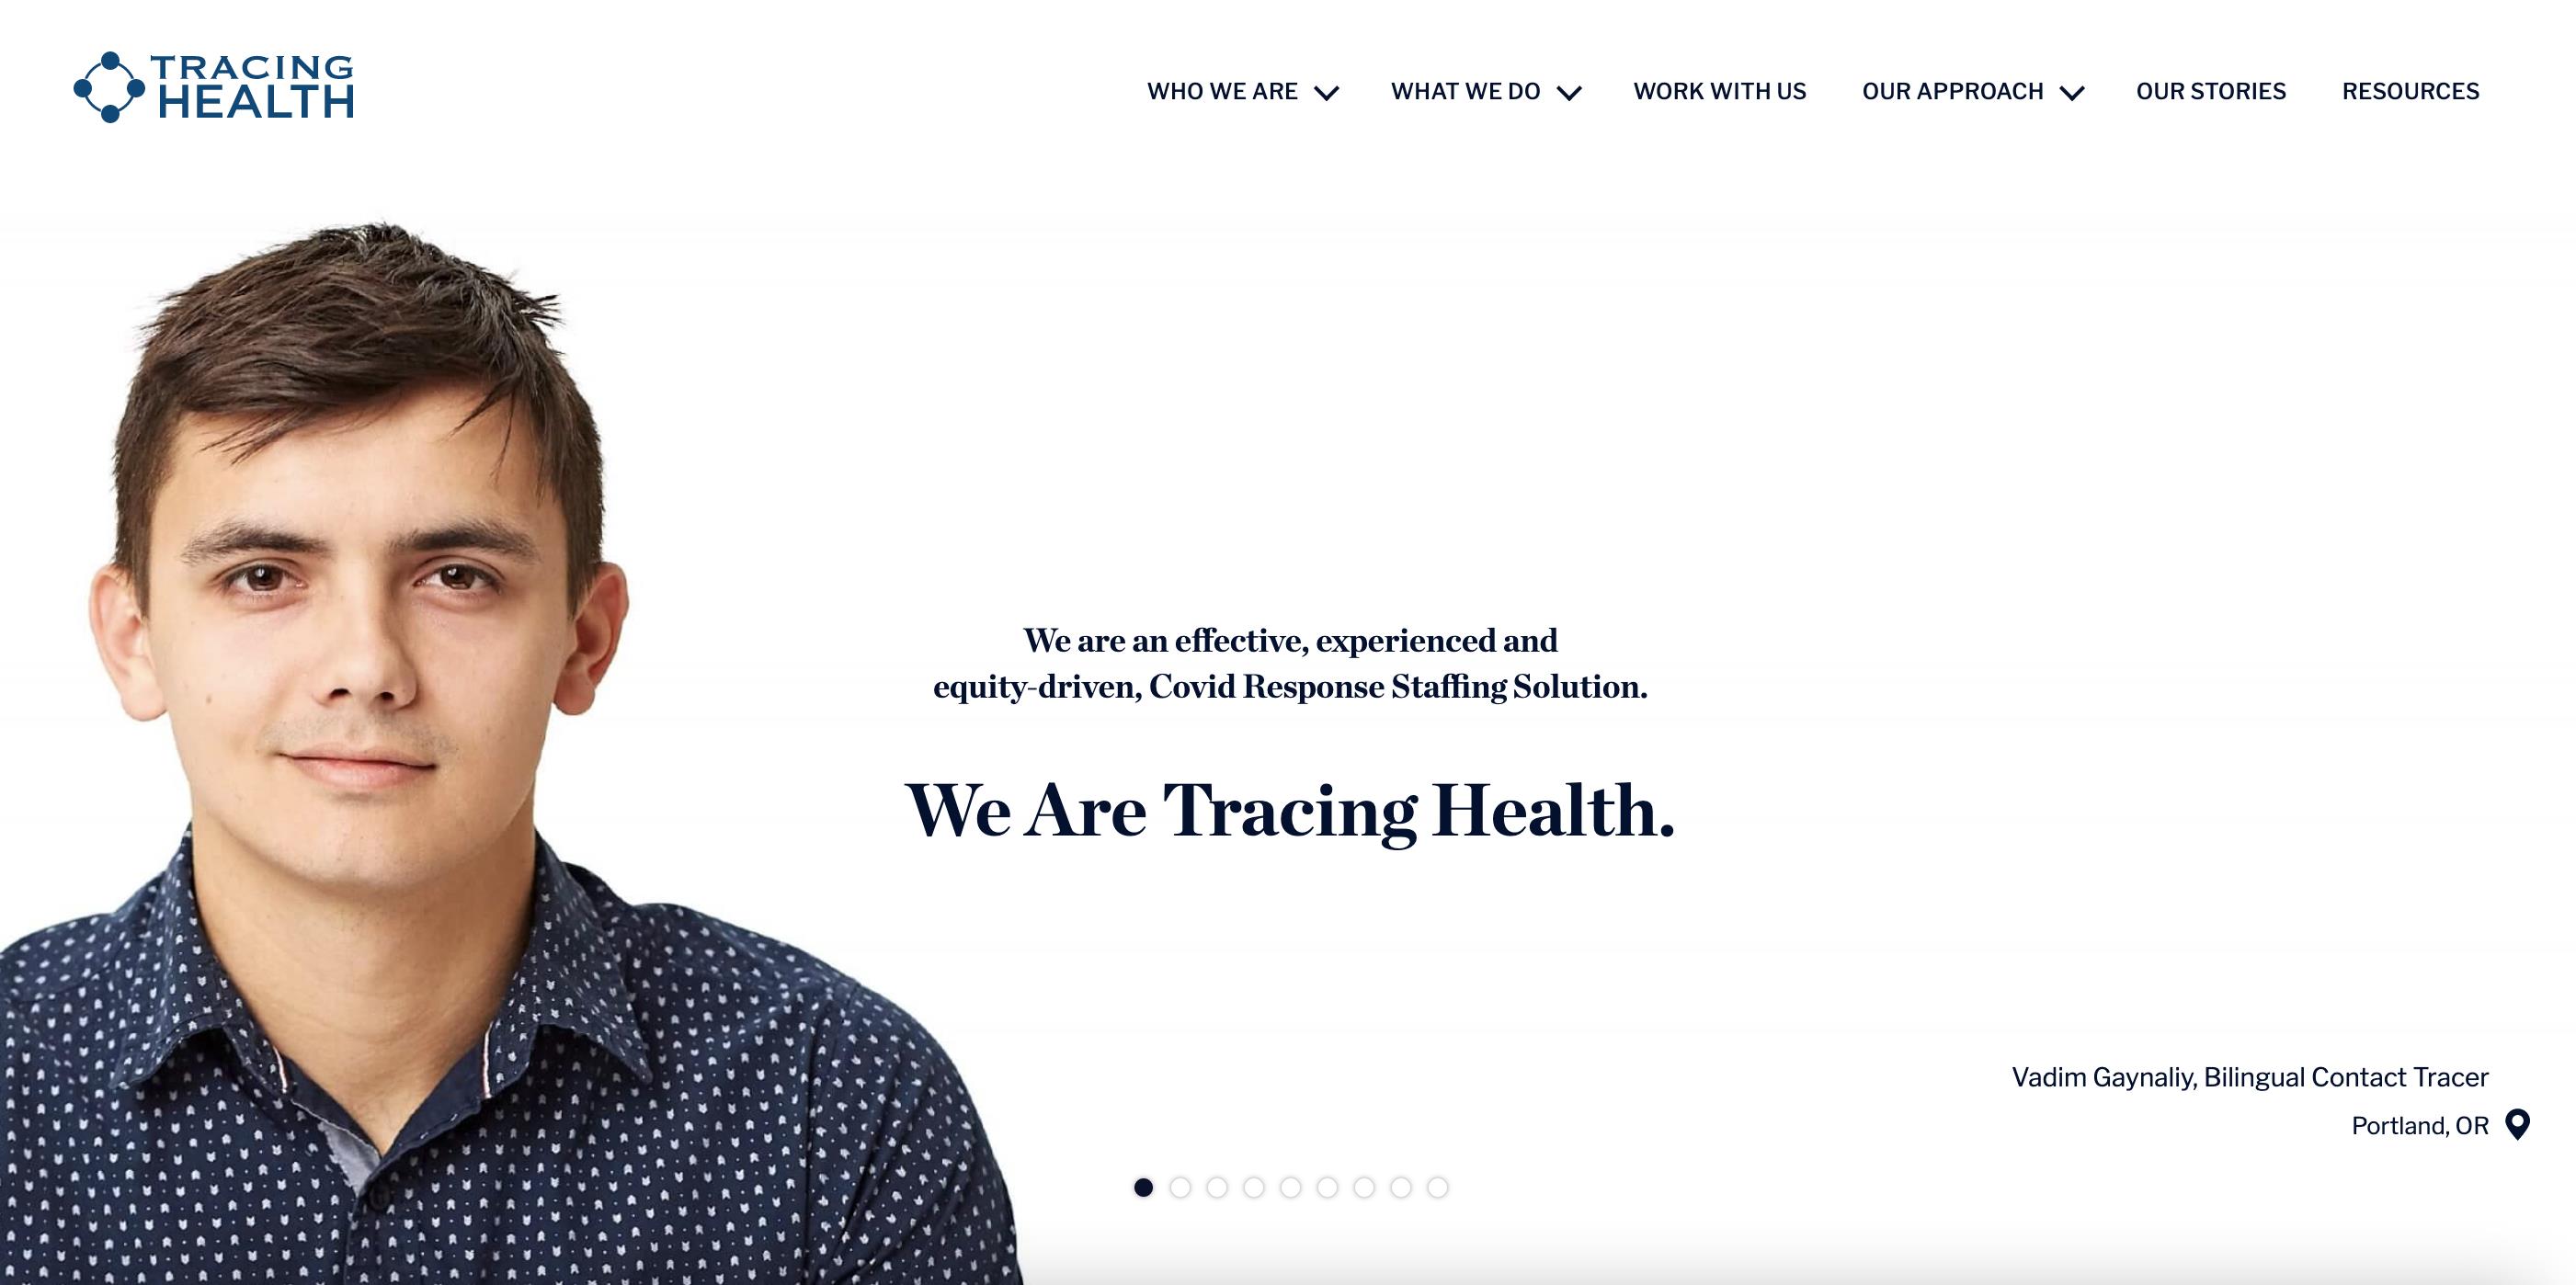 Anthem Awards: Tracing Health Wins Bronze Twice in Health Category